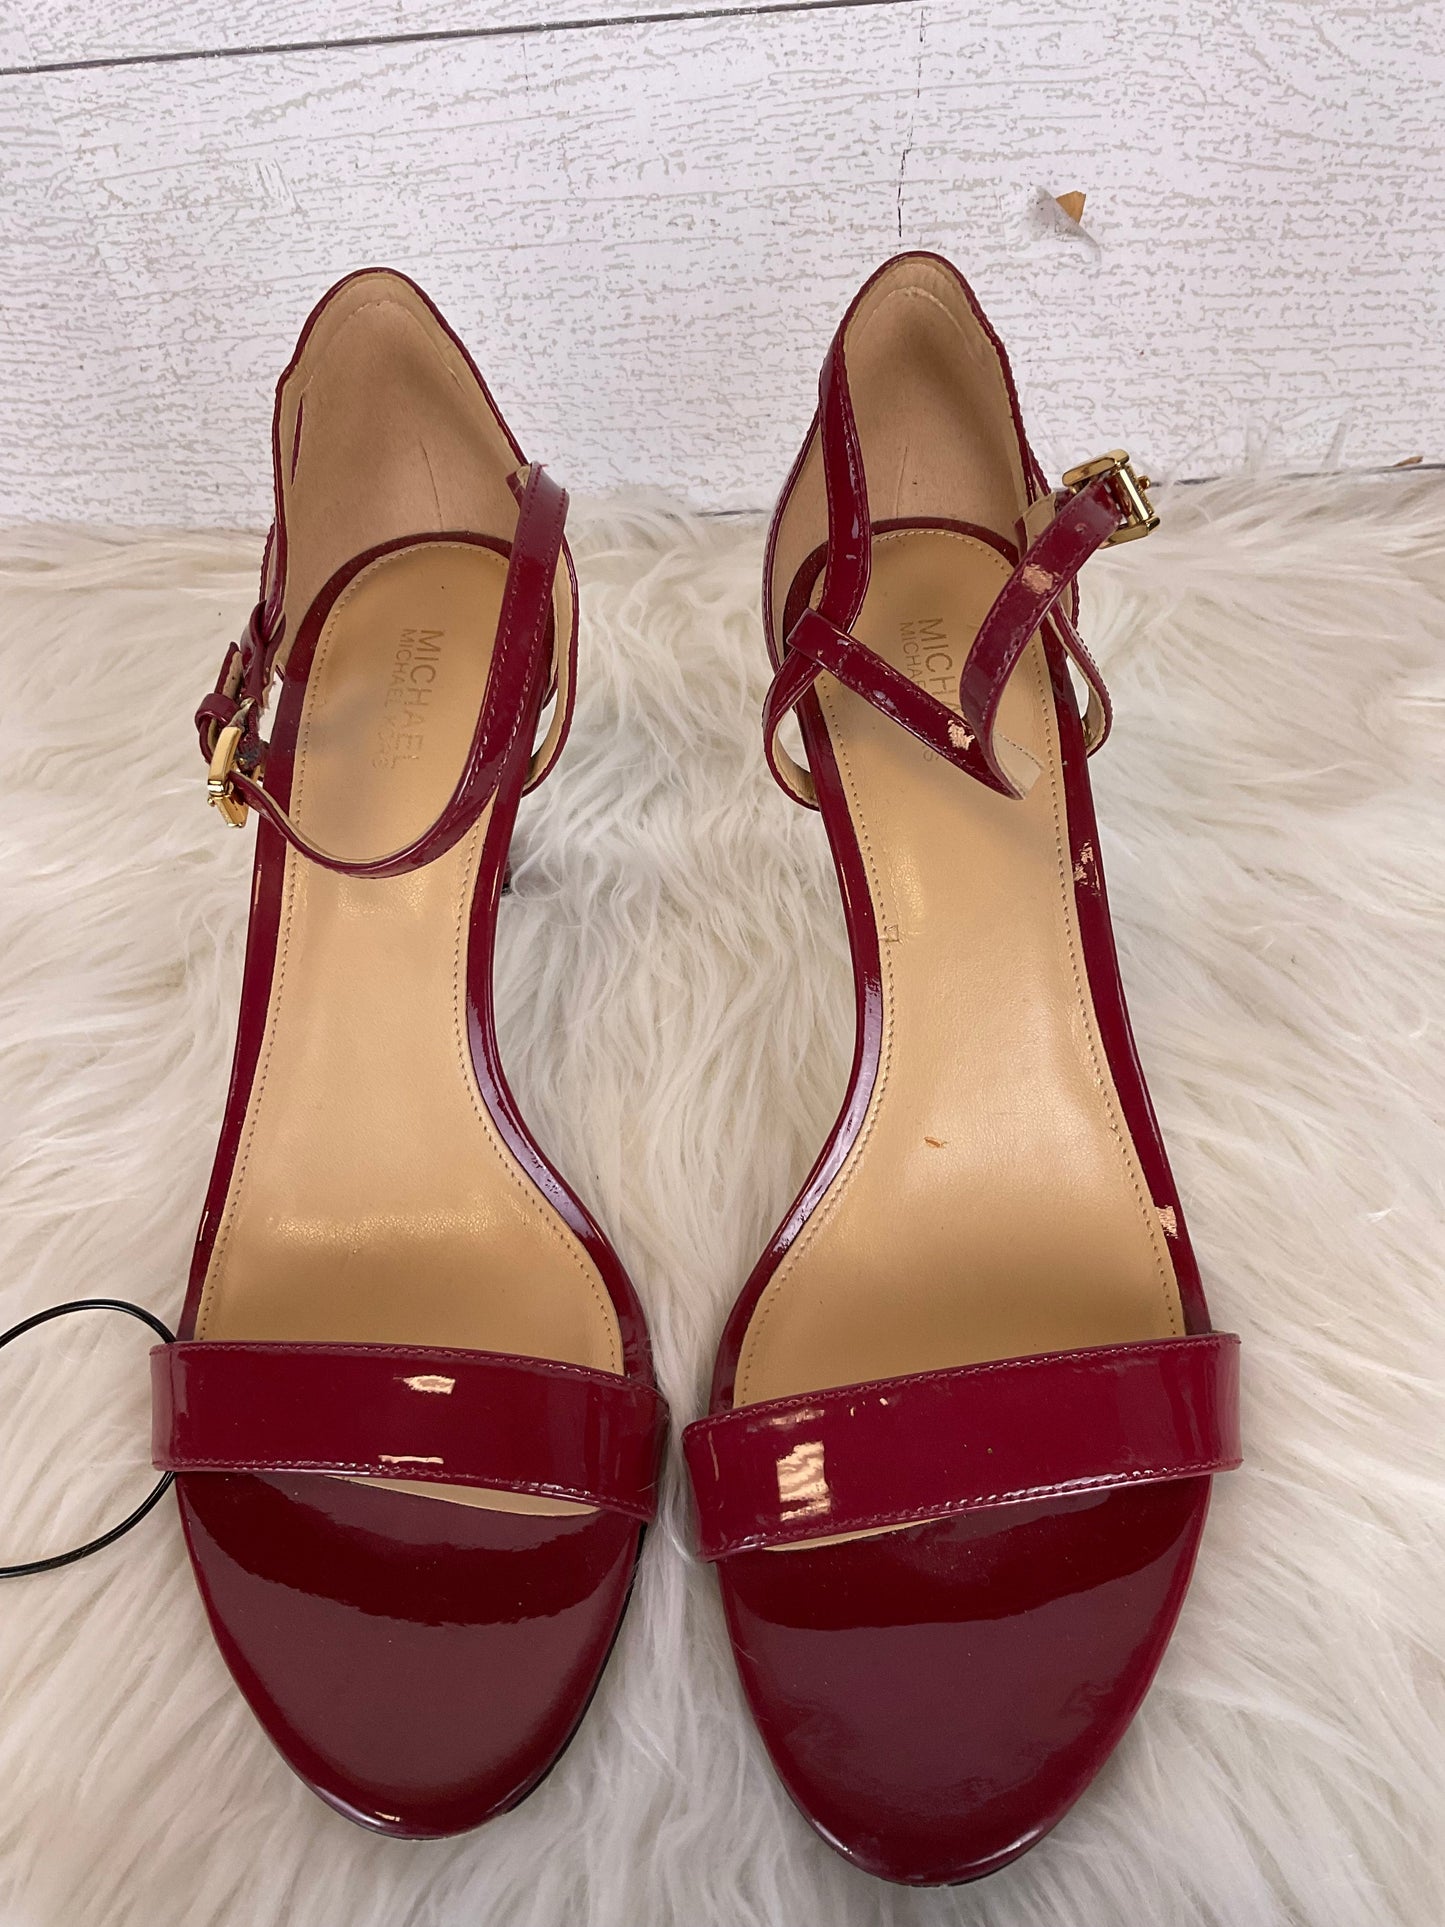 Red Sandals Heels Stiletto Michael By Michael Kors, Size 9